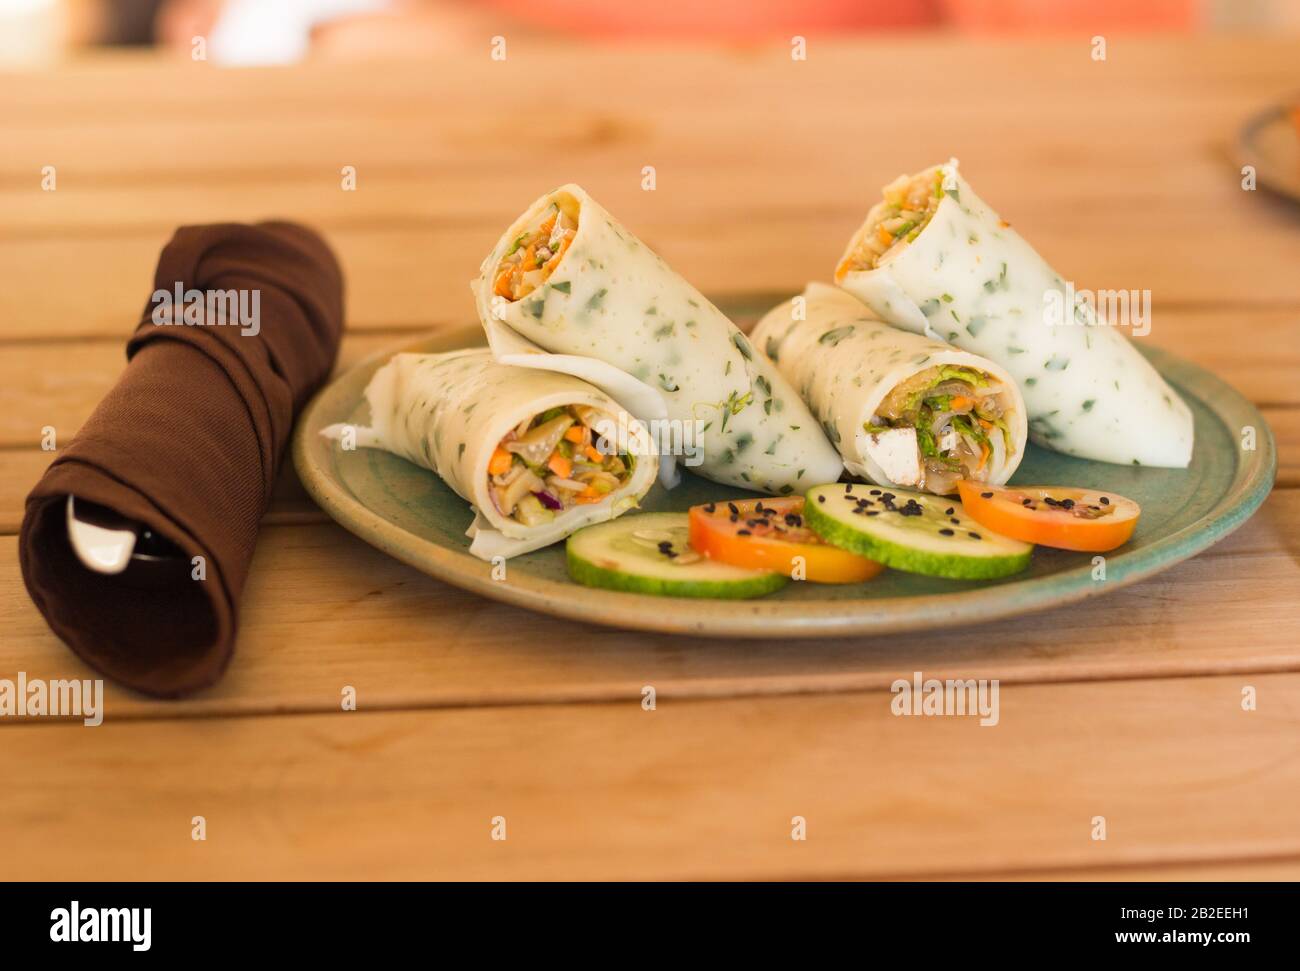 Healthy vegetable lumpia roll Stock Photo